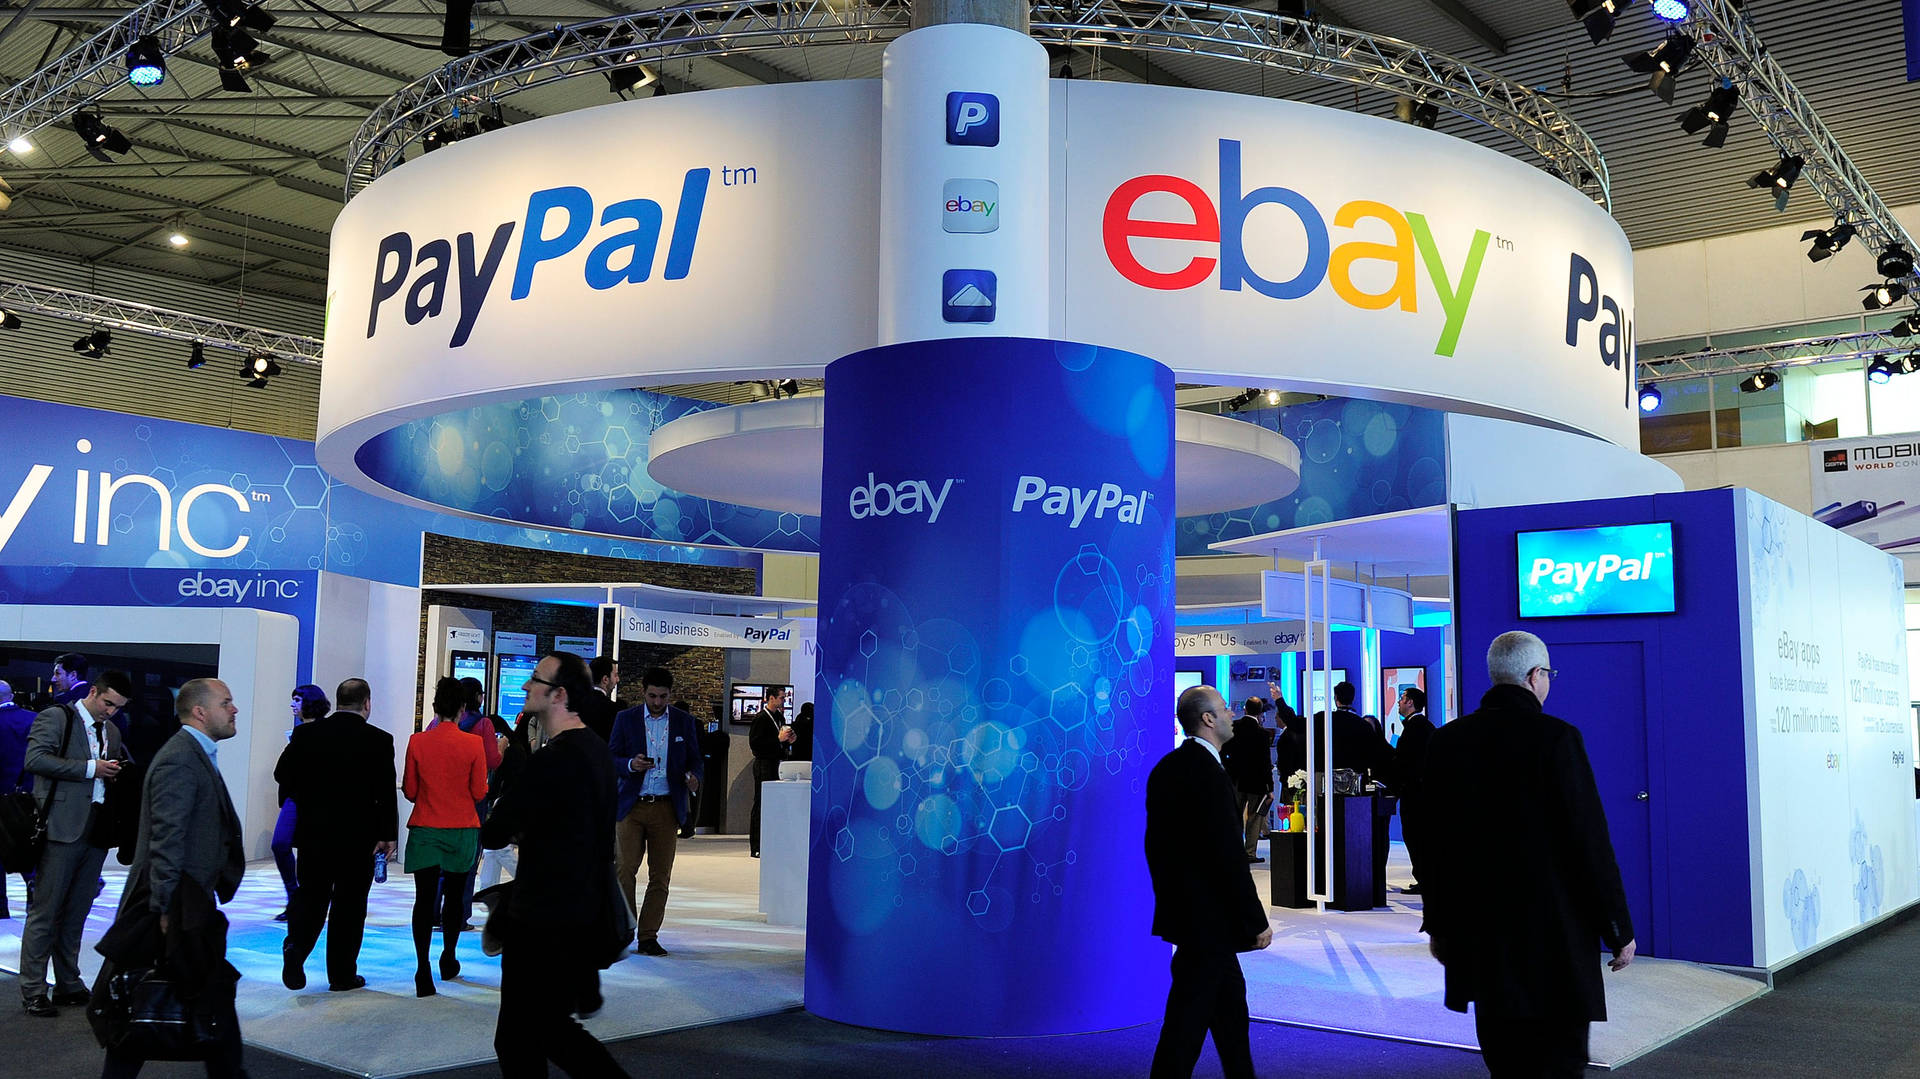 Paypal Ebay Booth Wallpaper